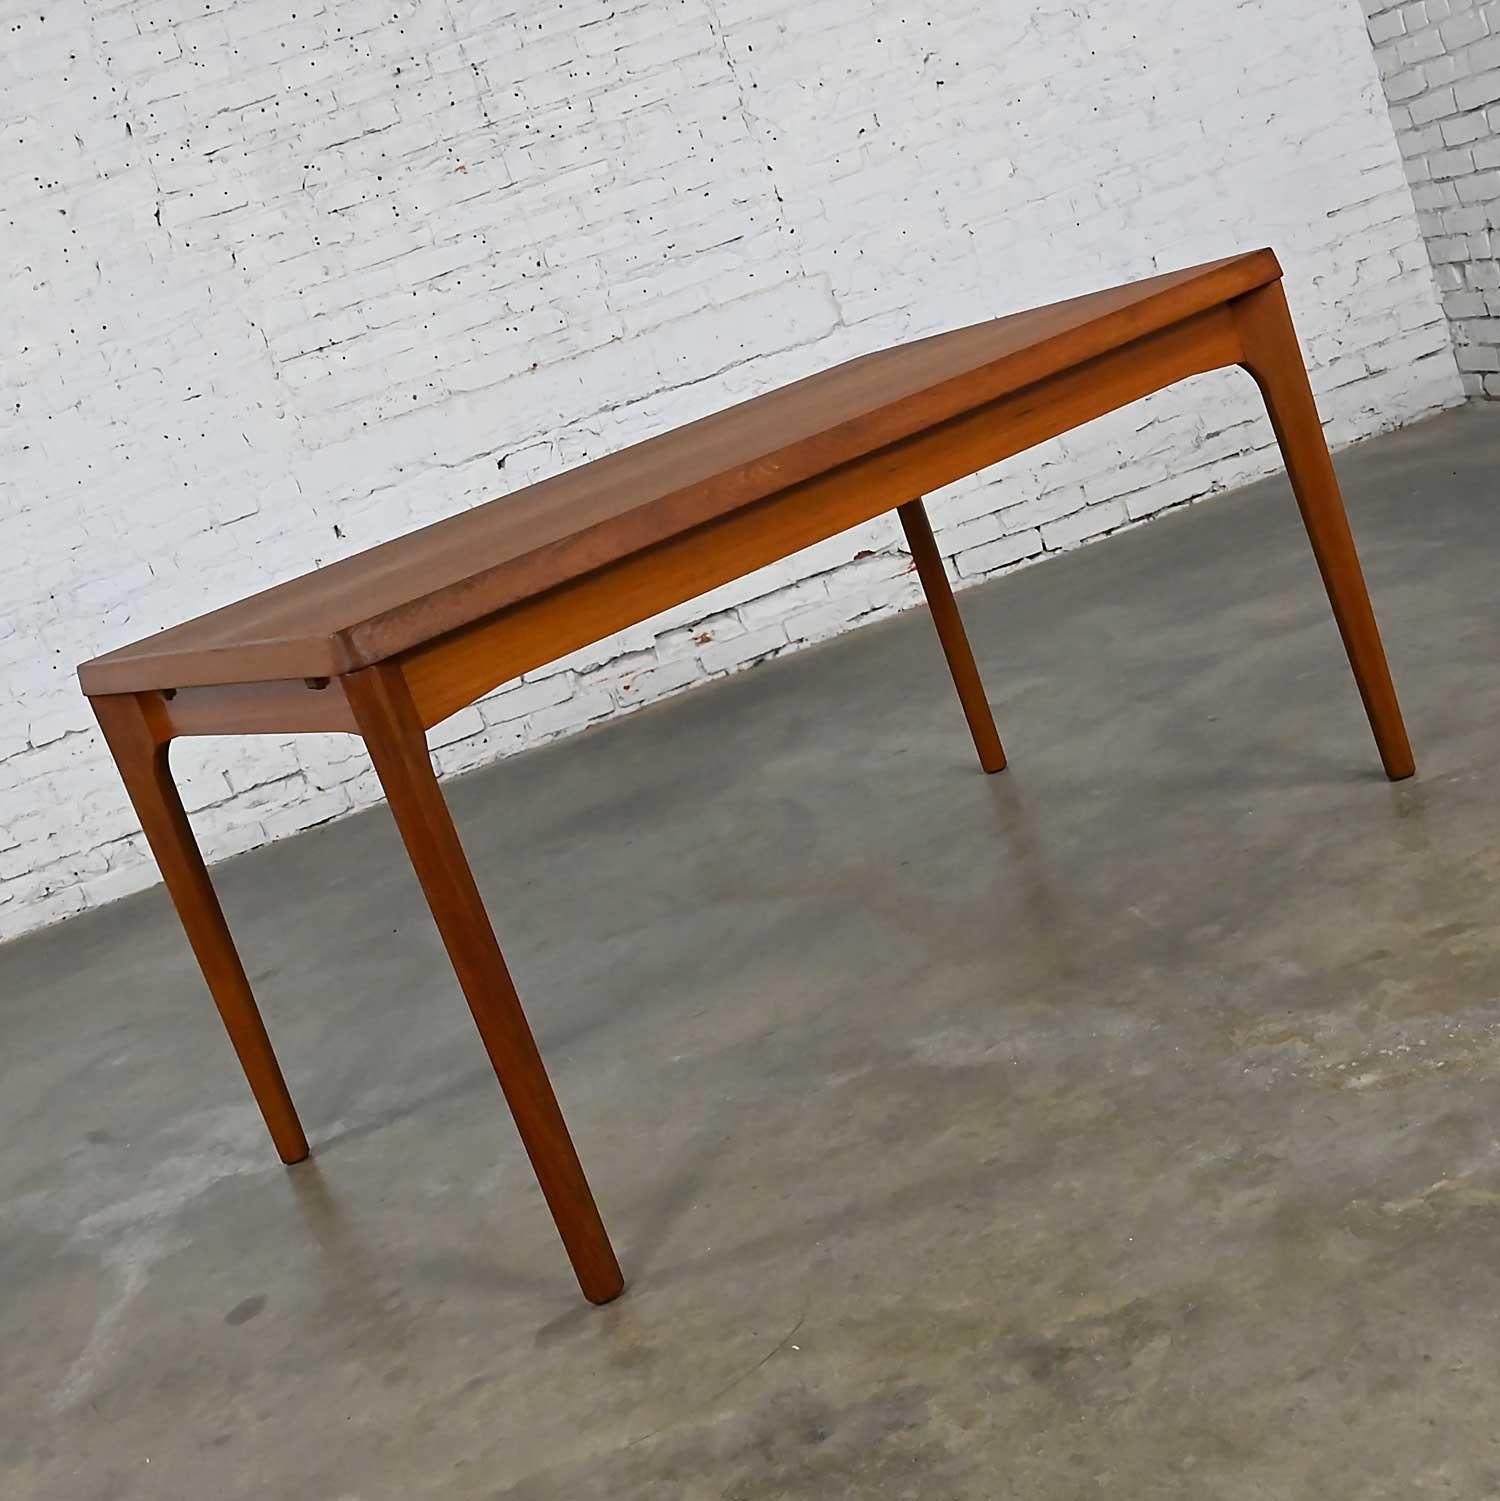 Gorgeous vintage Scandinavian Modern teak veneer extension dining table by Henning Kjaernulf for Vejle Stole Mobelfabrik. Beautiful condition, keeping in mind that this is vintage and not new so will have signs of use and wear. The table has been